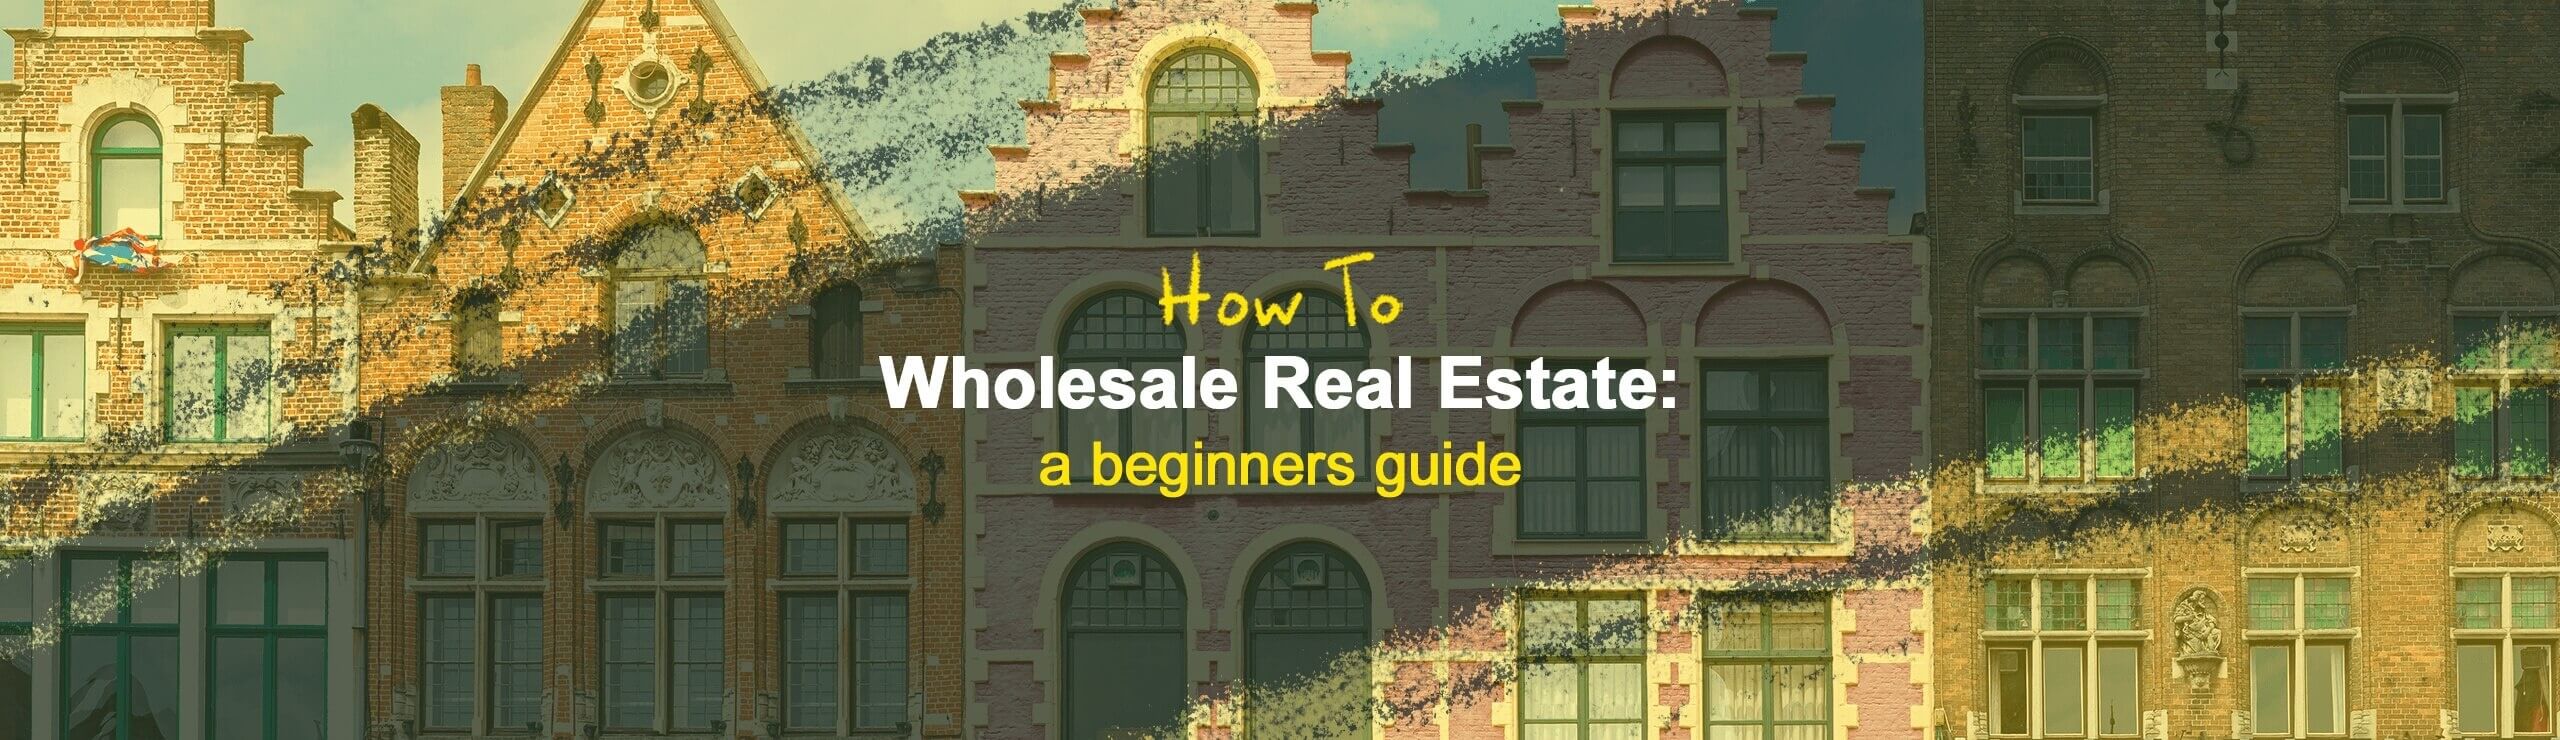 How to Wholesale Real Estate: A Beginner's Guide